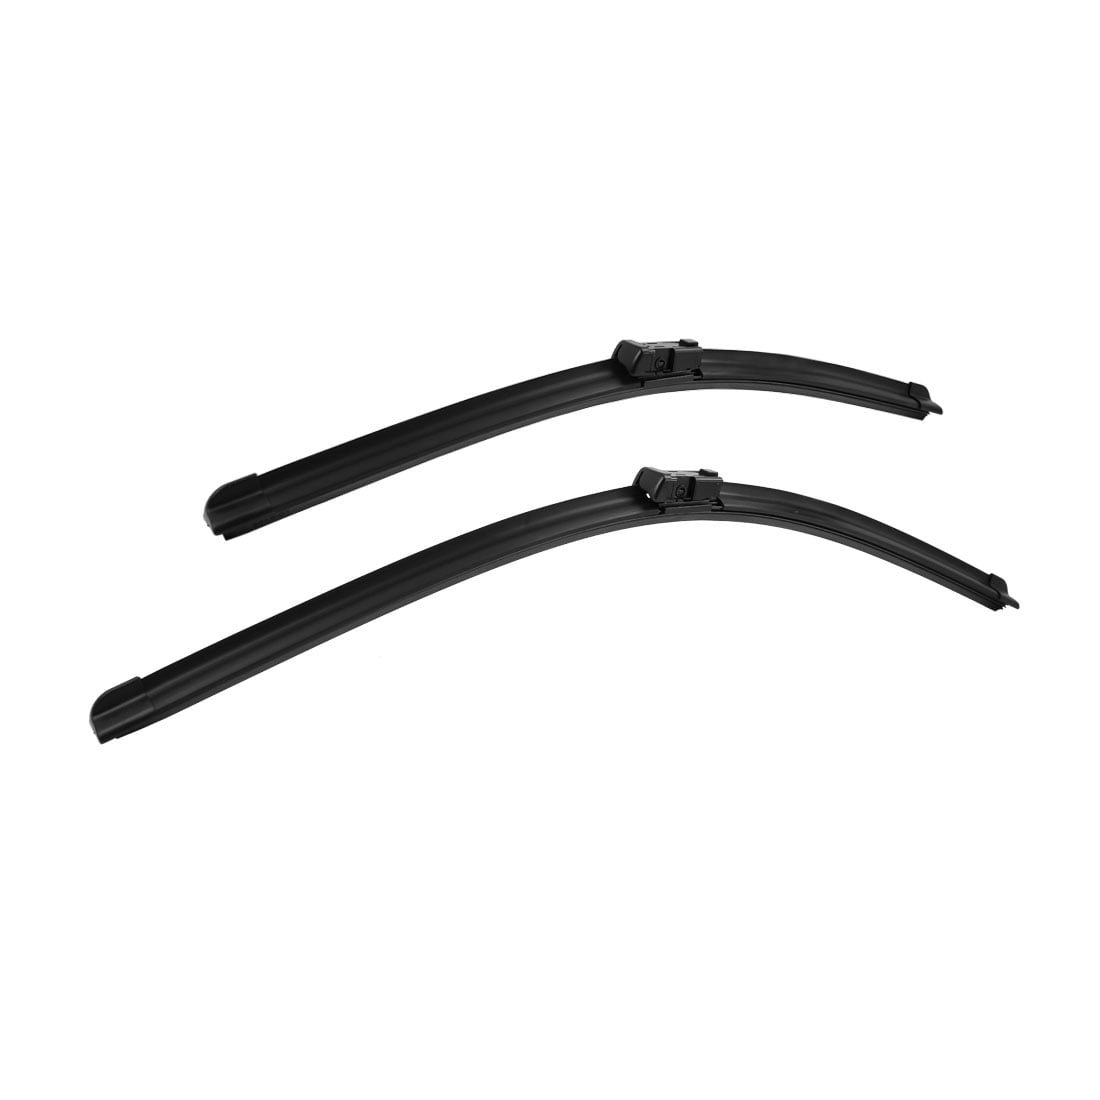 24" 17" Exact Fit Front Windshield Wiper Blades for Chevrolet Equinox 2010 2011 2012 2013 2014 Windshield Wiper Size For 2016 Chevy Equinox